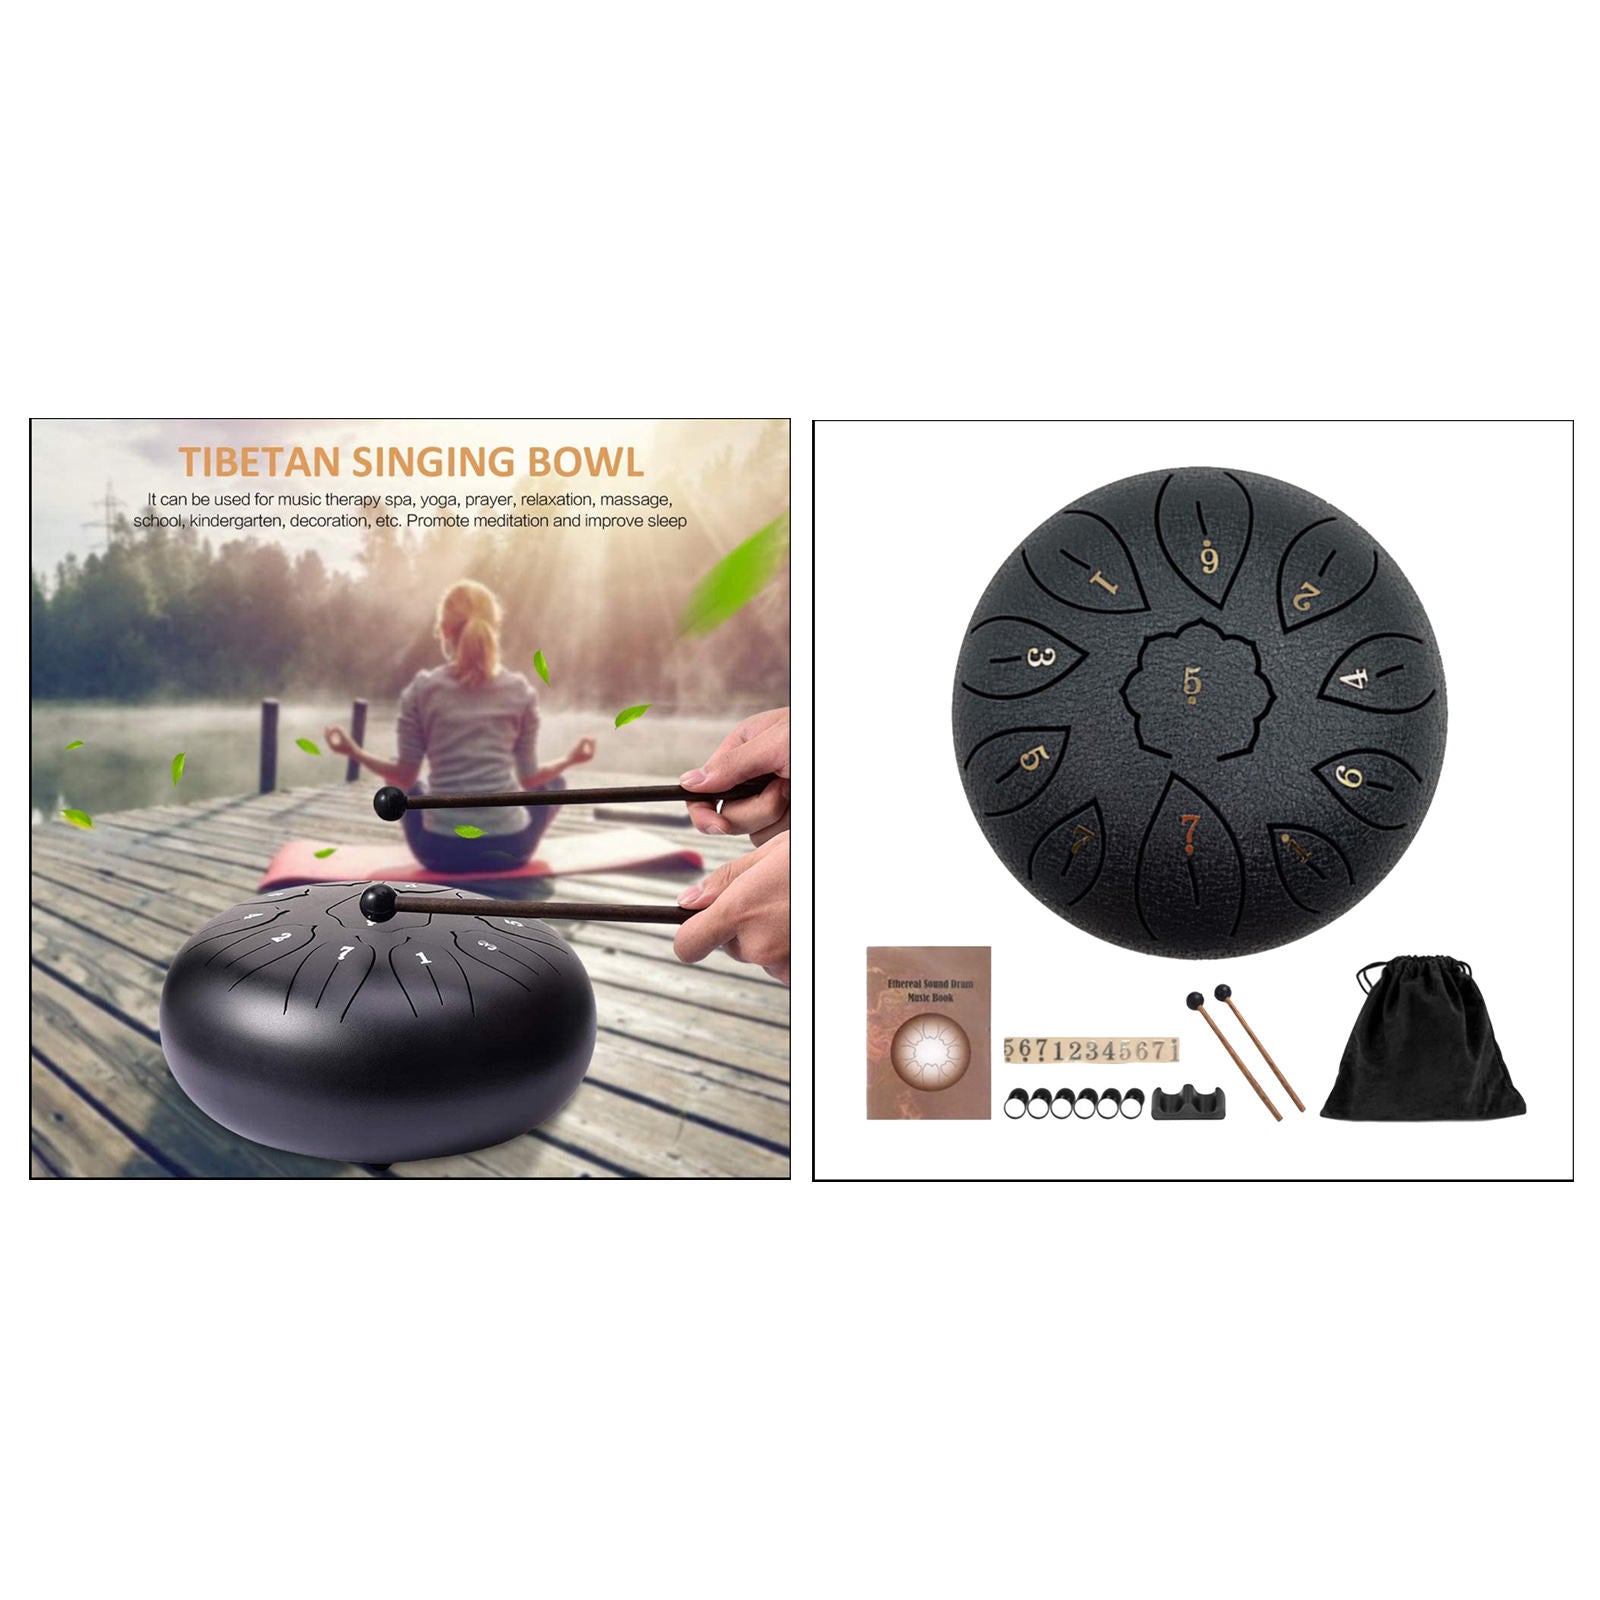 11 Steel Tongue Drum and Drum Mallets Carrying Bag Music Book Gift black